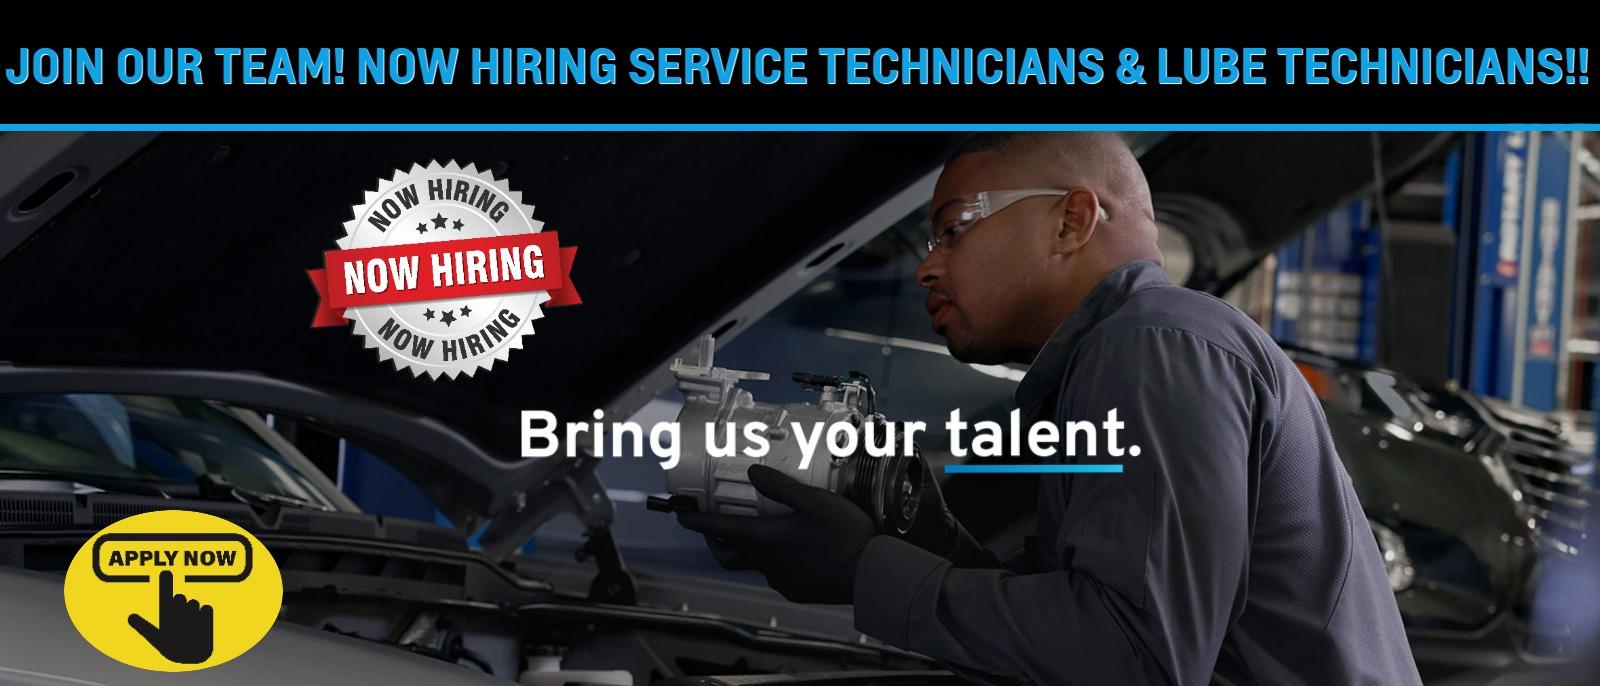 JOIN OUR TEAM. NOW HIRING SERVICE TECHNICIANS. APPLY NOW.